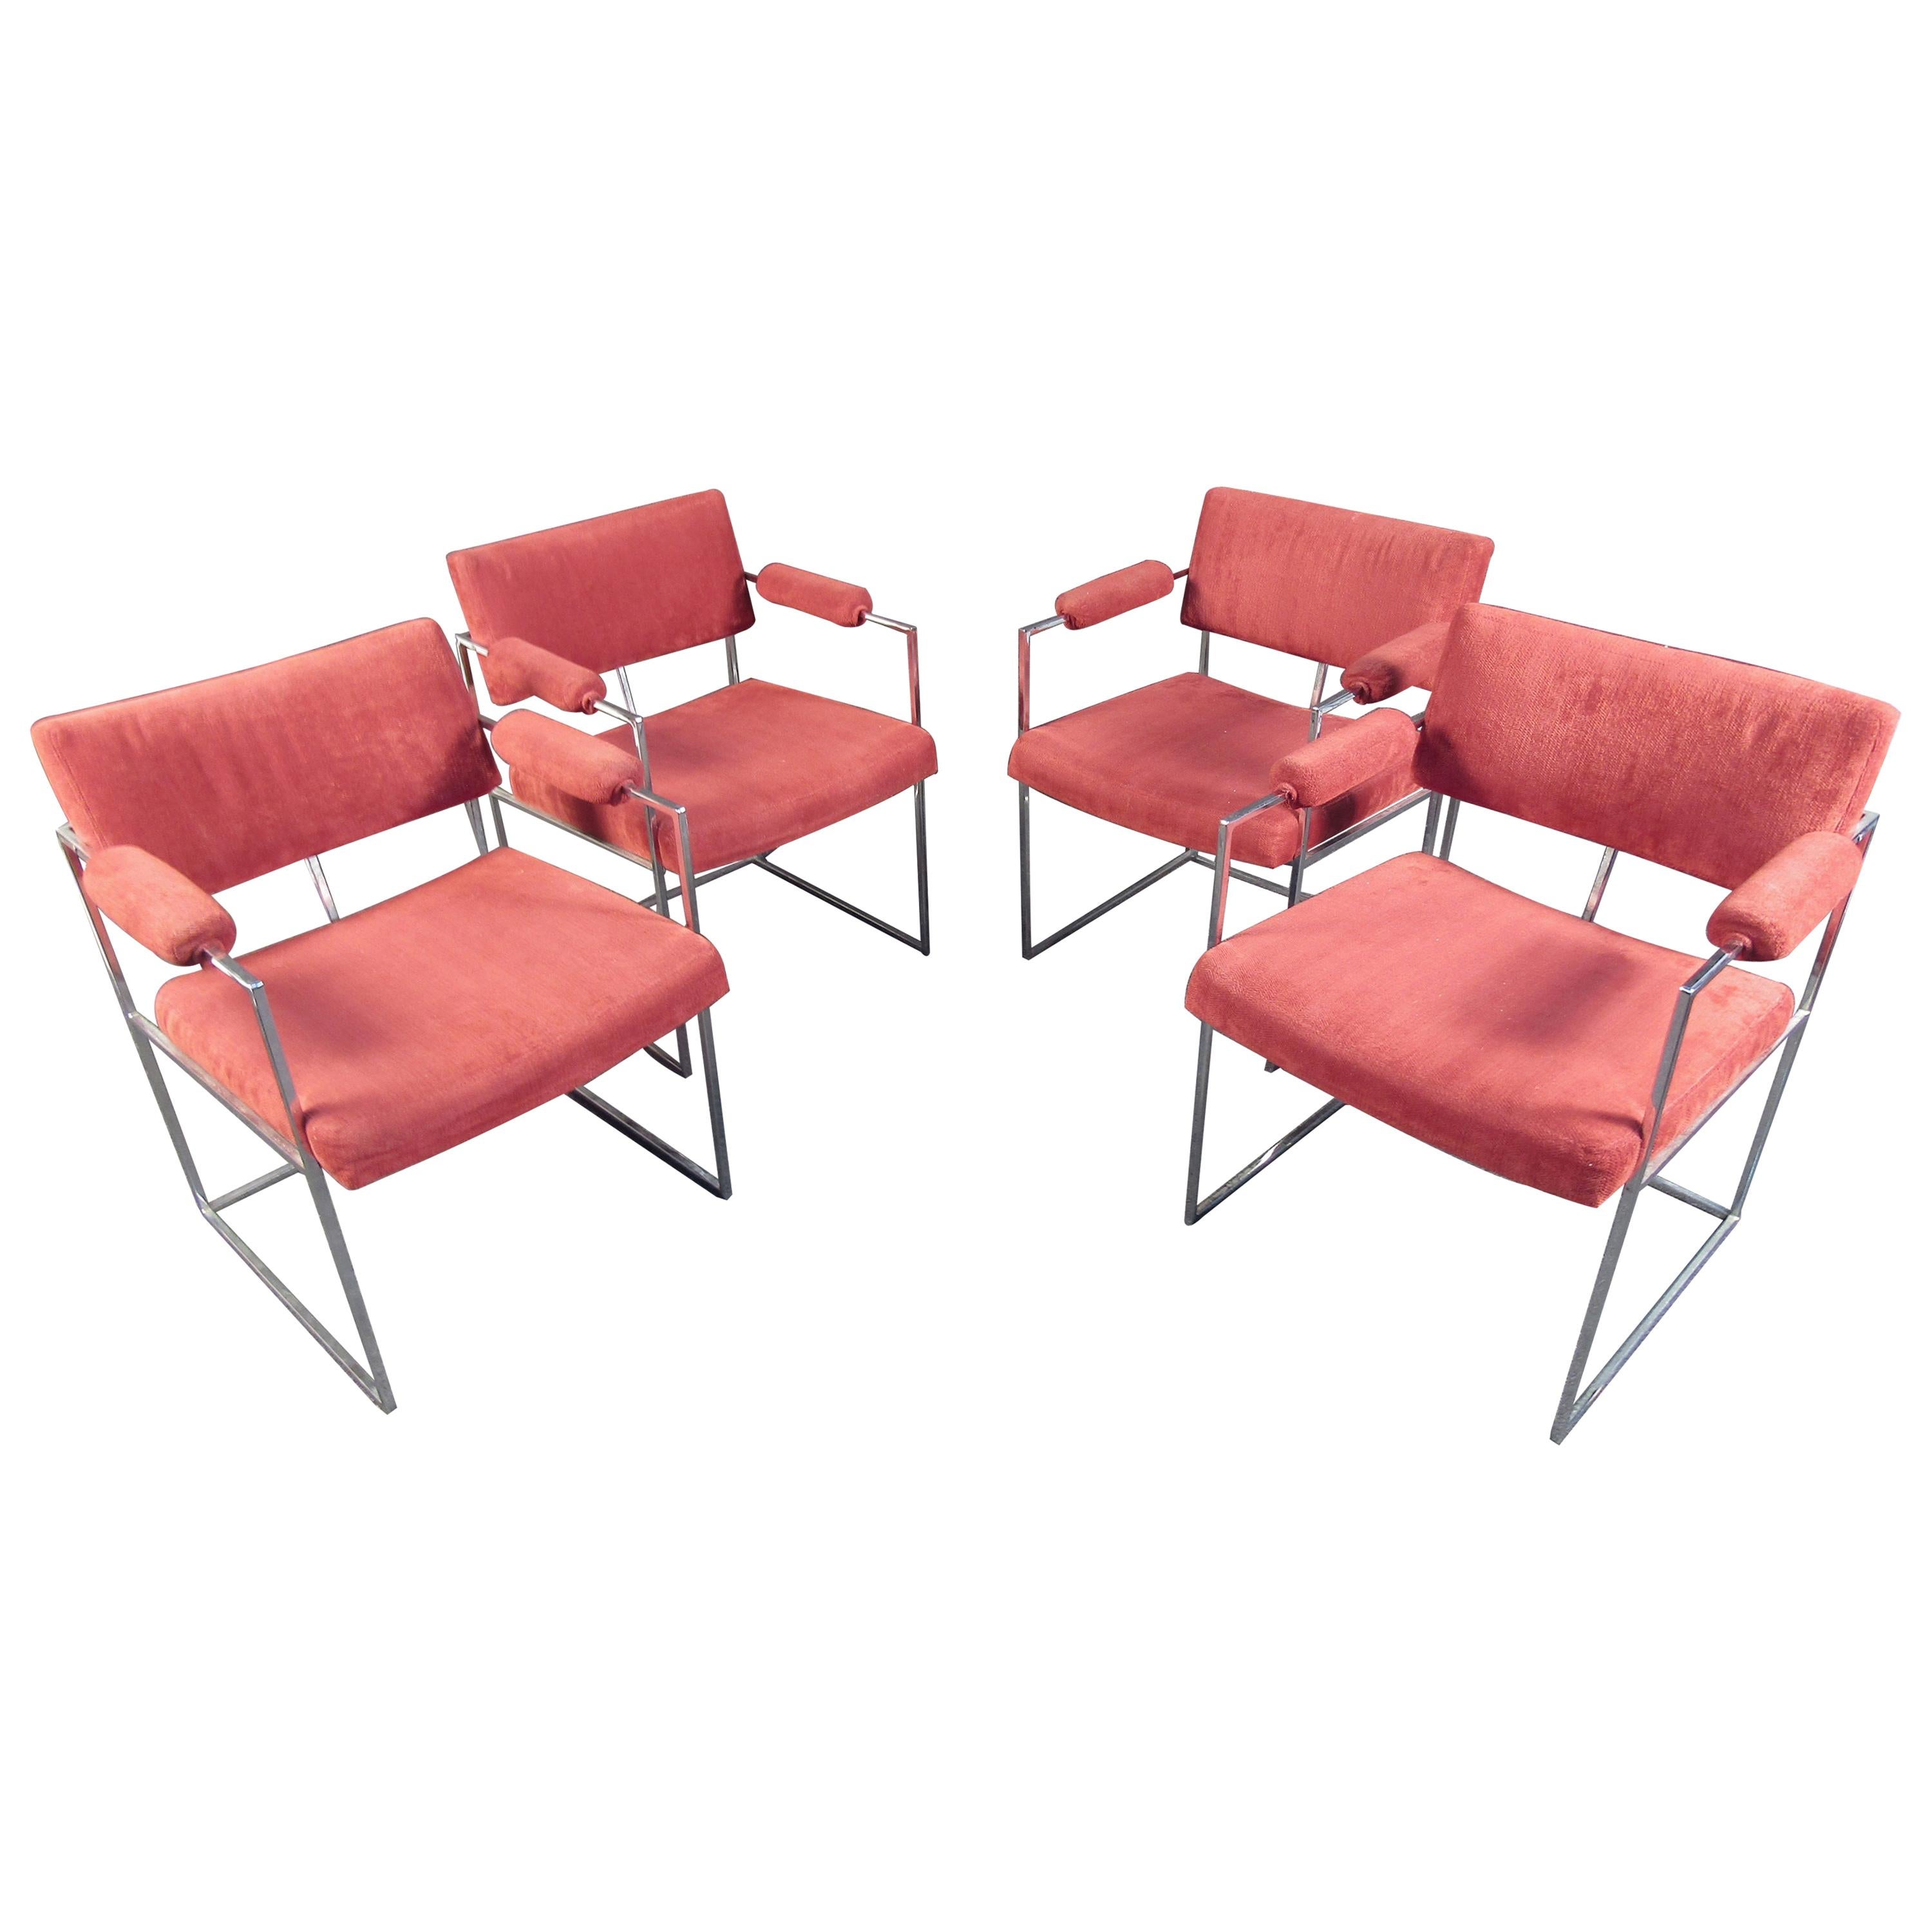 Set of Milo Baughman Chrome and Upholstery Armchairs